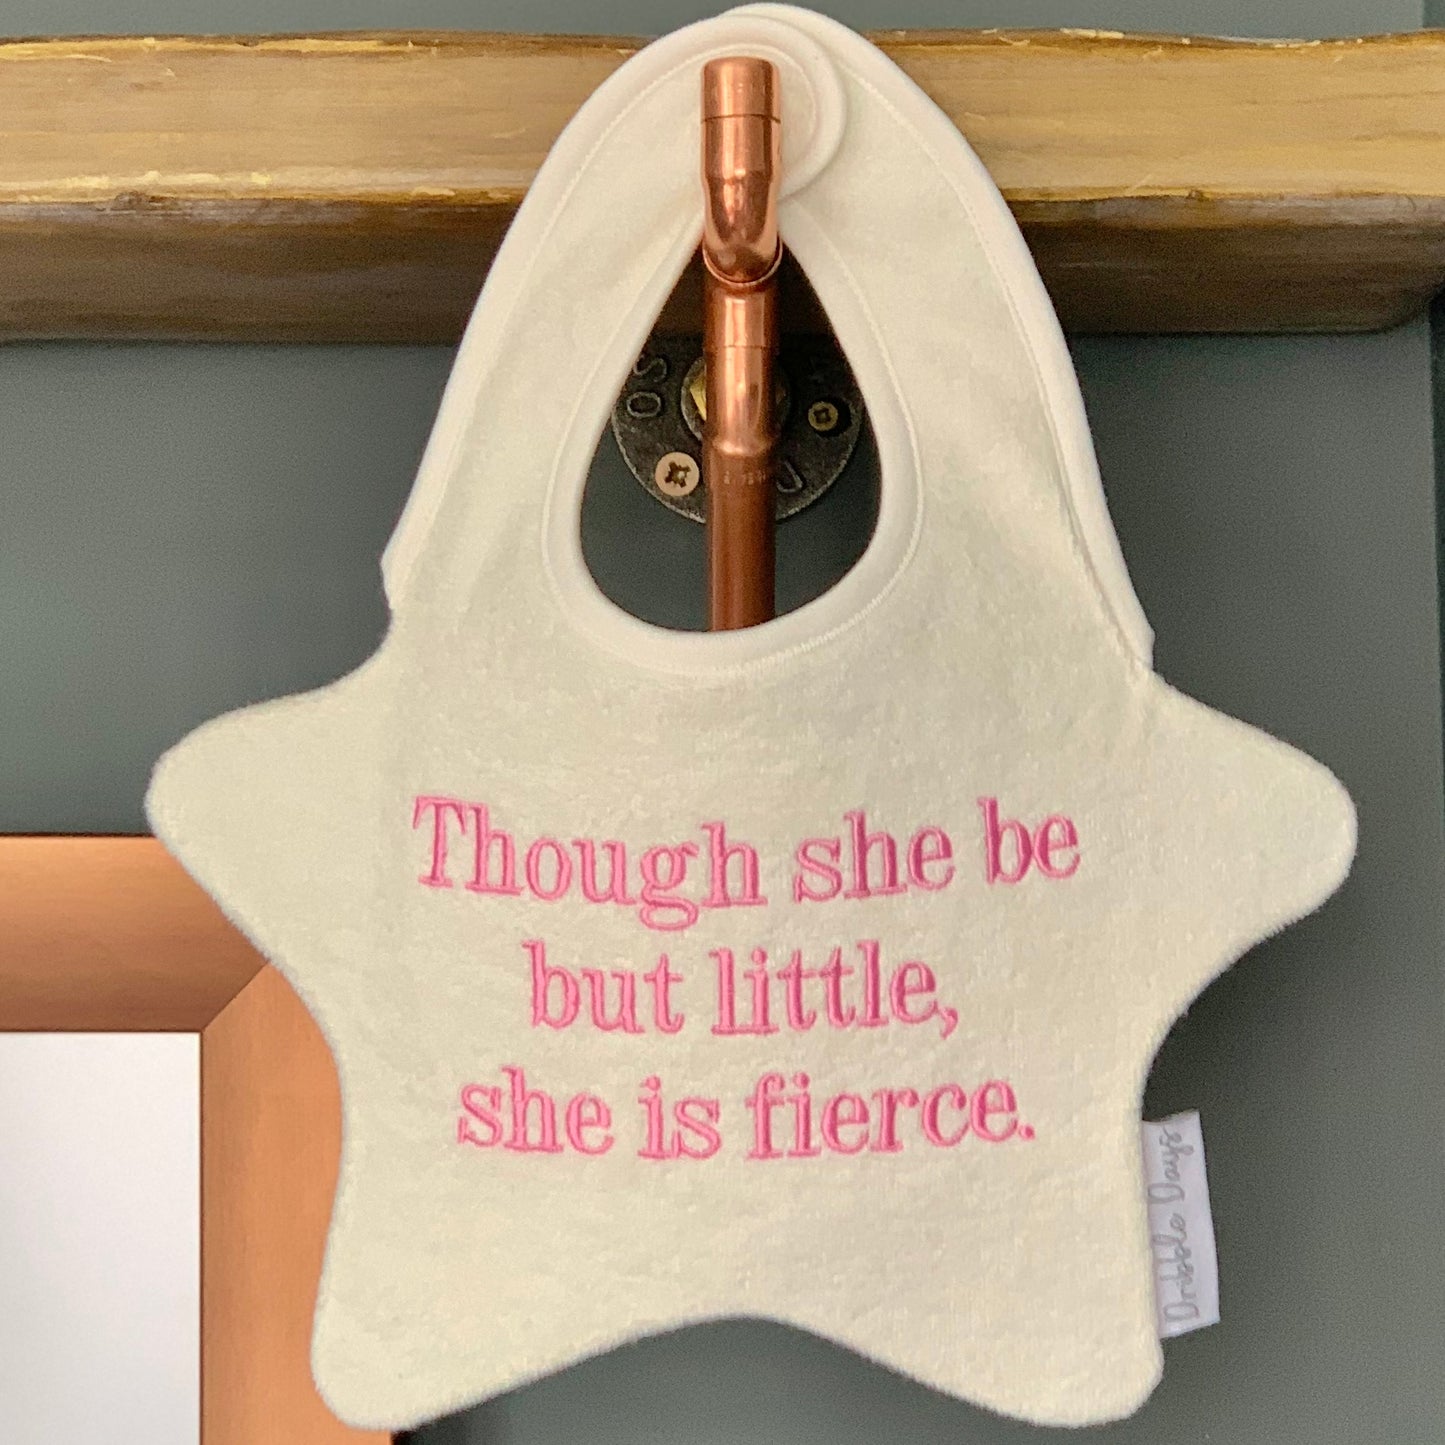 Shakespeare Midsummers Night Dream quote bib: Though she be but little, she is fierce.